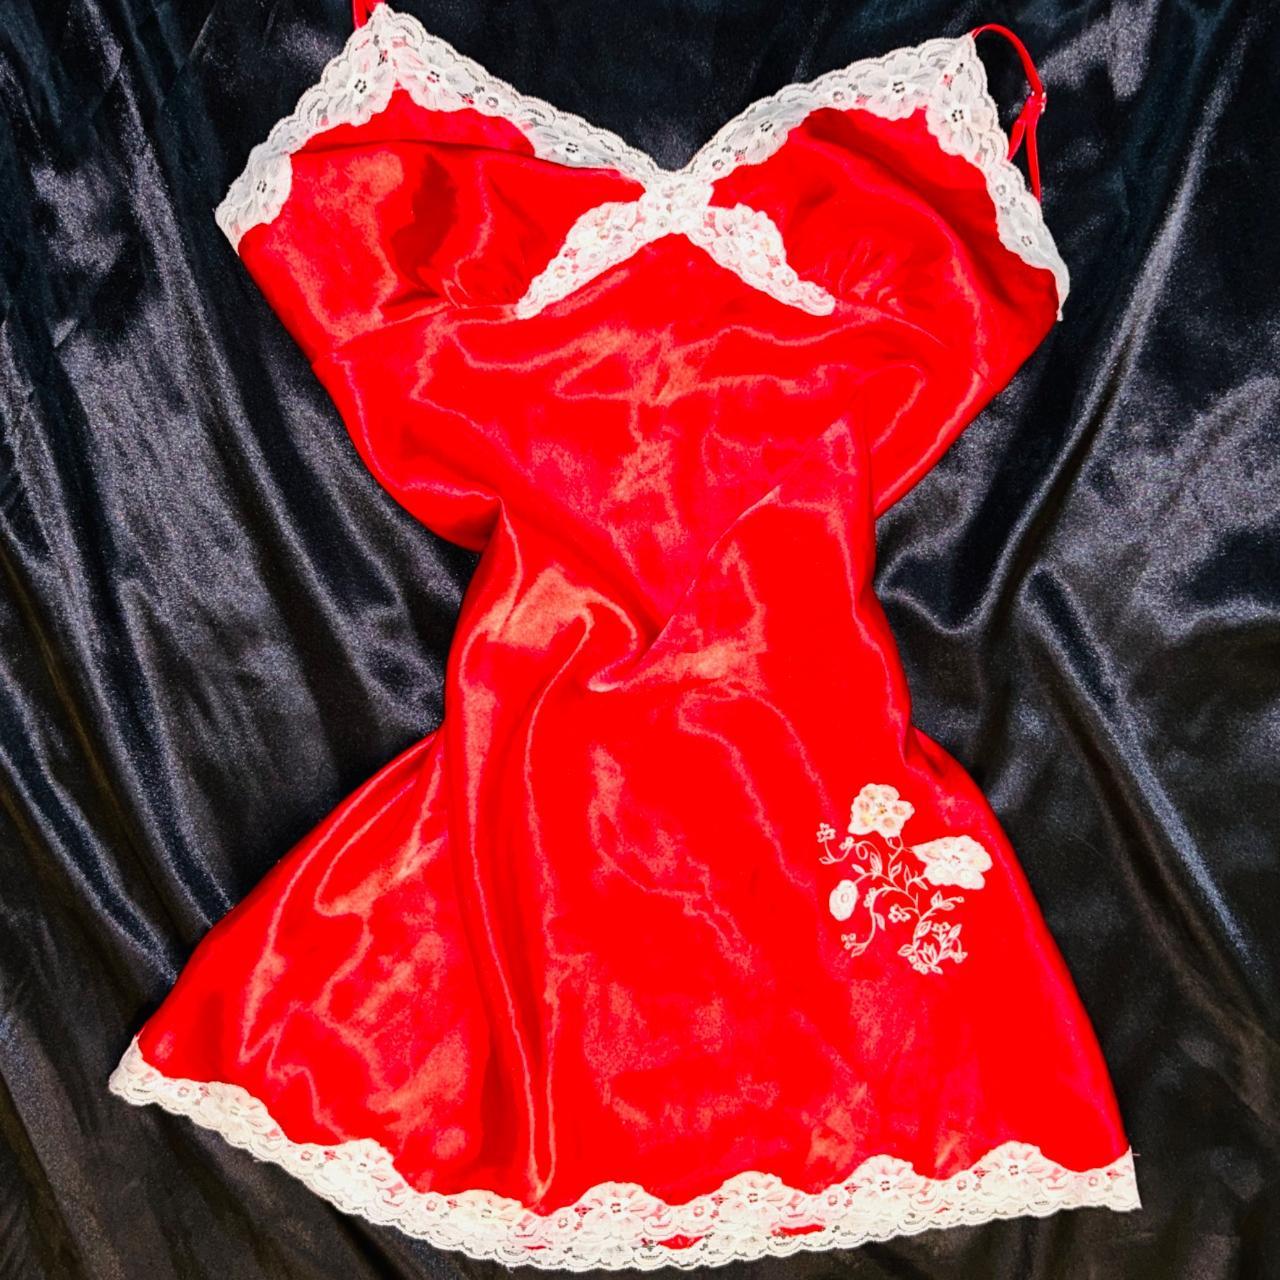 Woman's M Red white lace floral Sleep slip - Depop